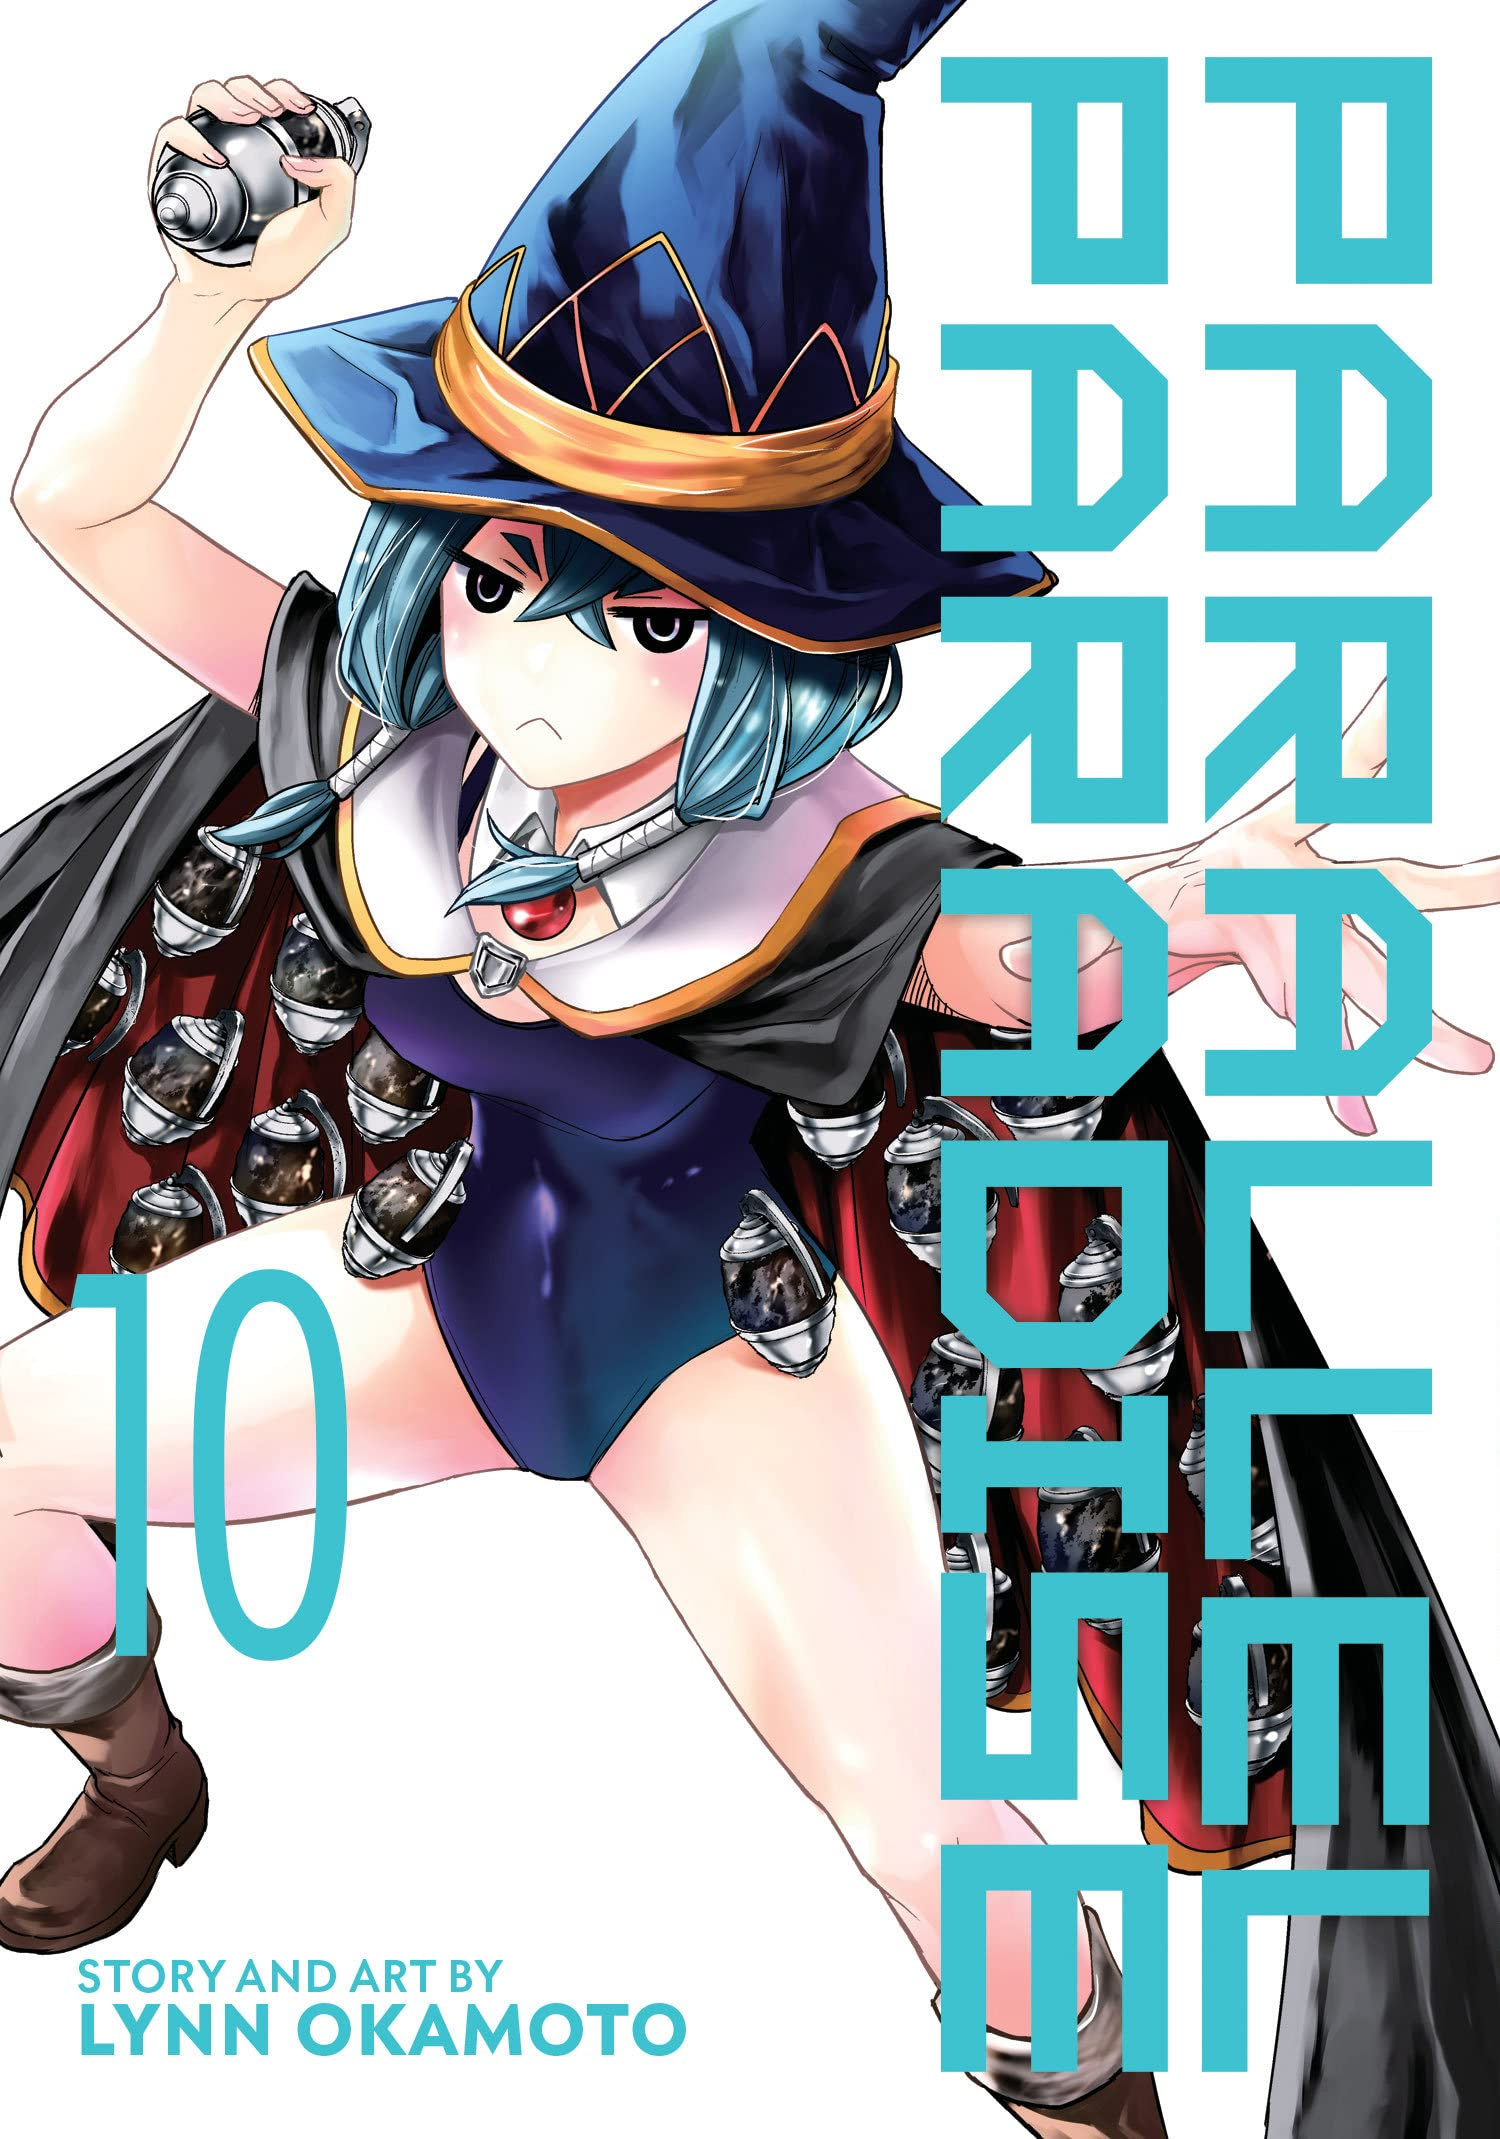 Read Parallel Paradise Manga English [New Chapters] Online Free